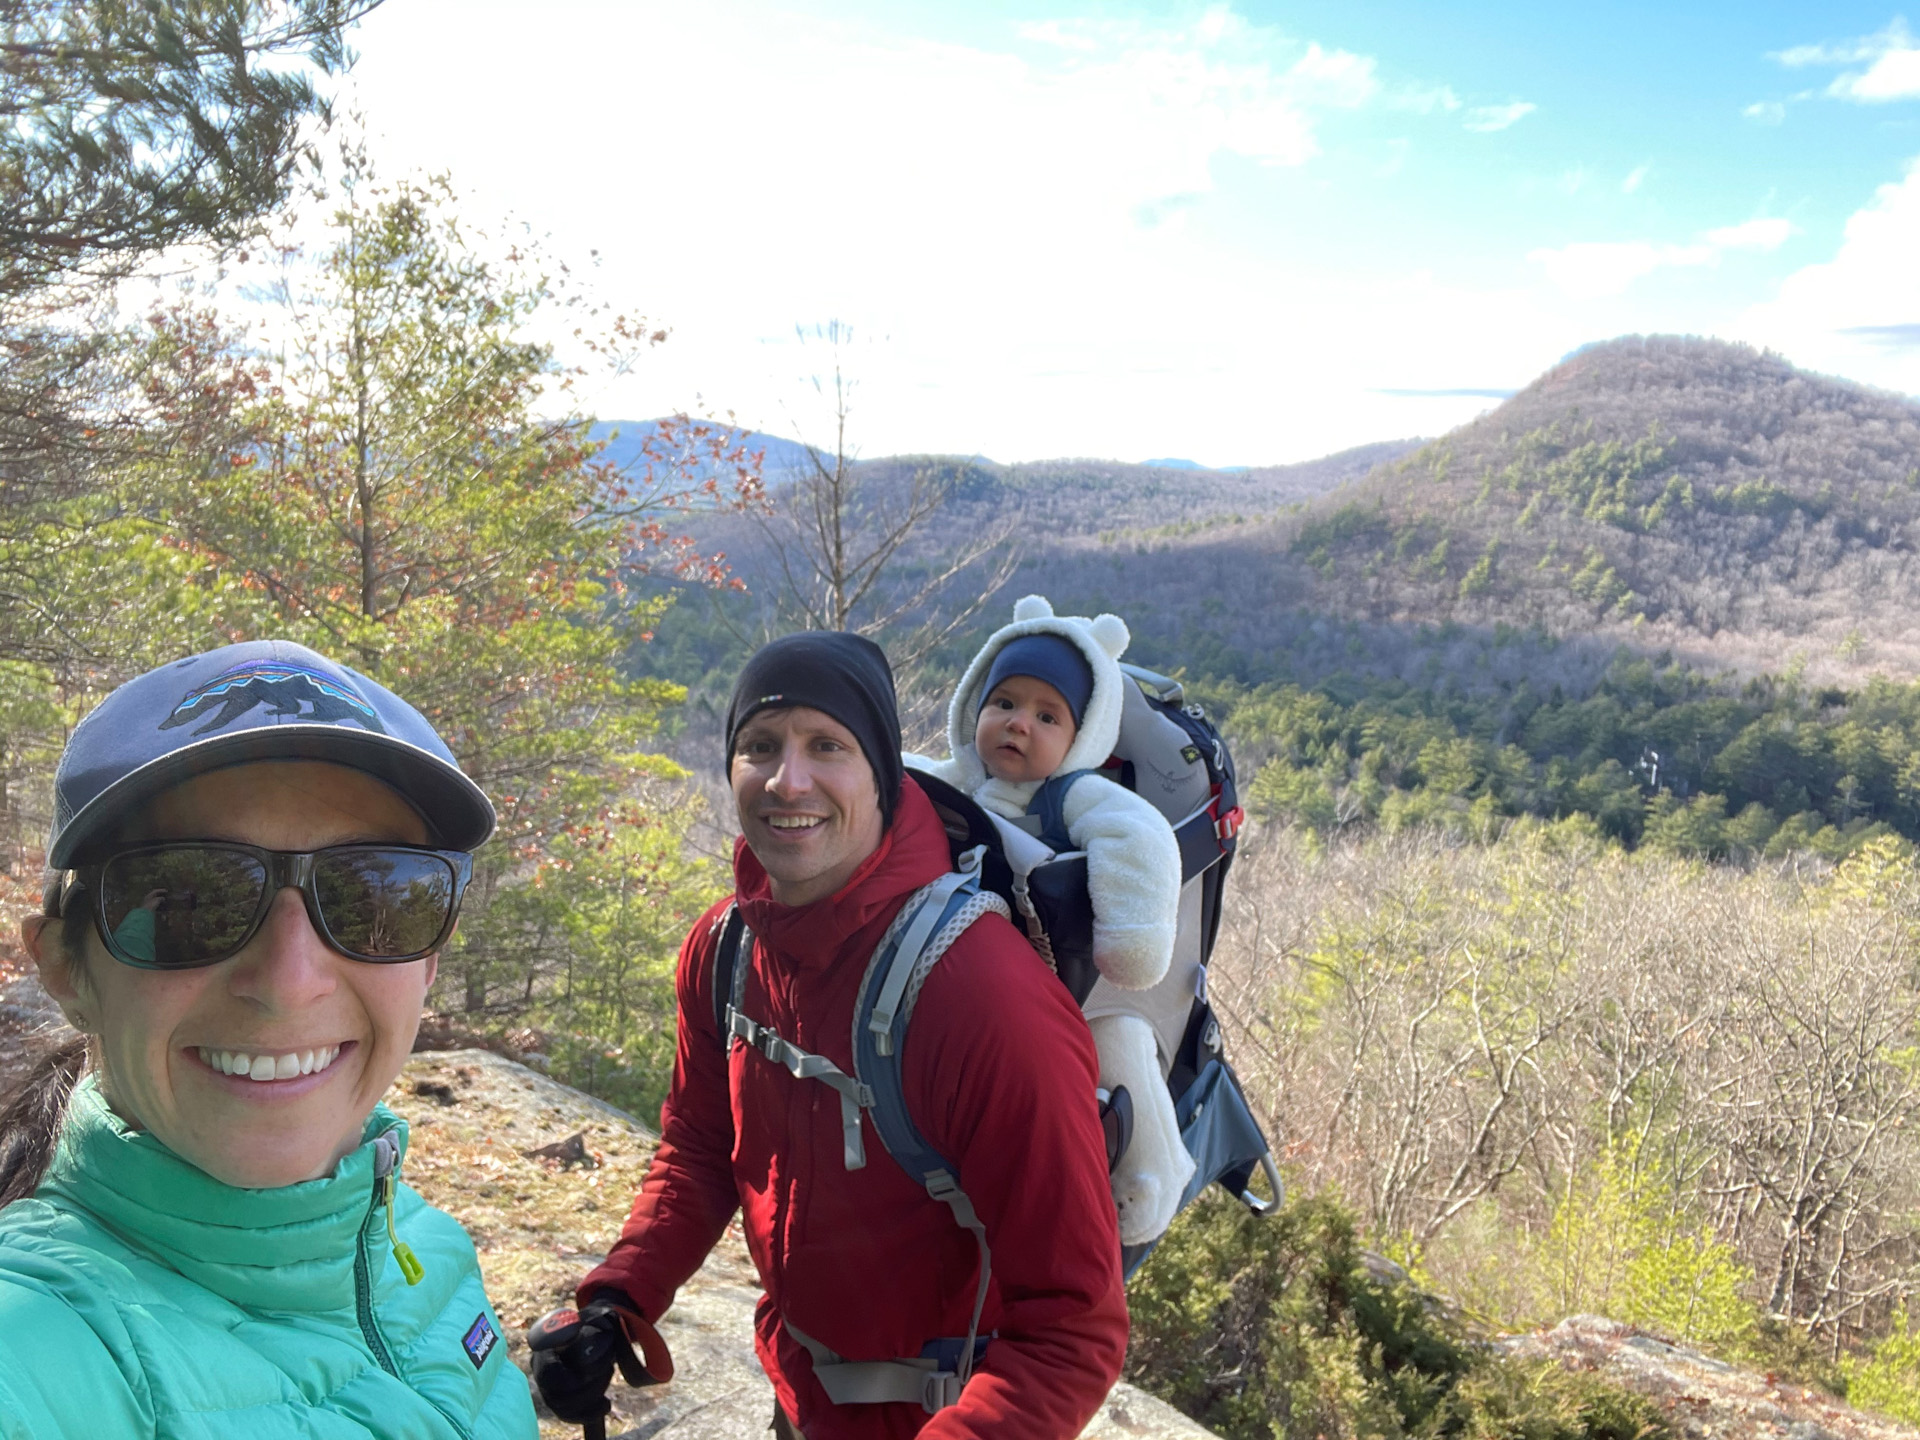 Michele Vidarte and family at the Godwin Preserve, scenic view of mountains from overlook